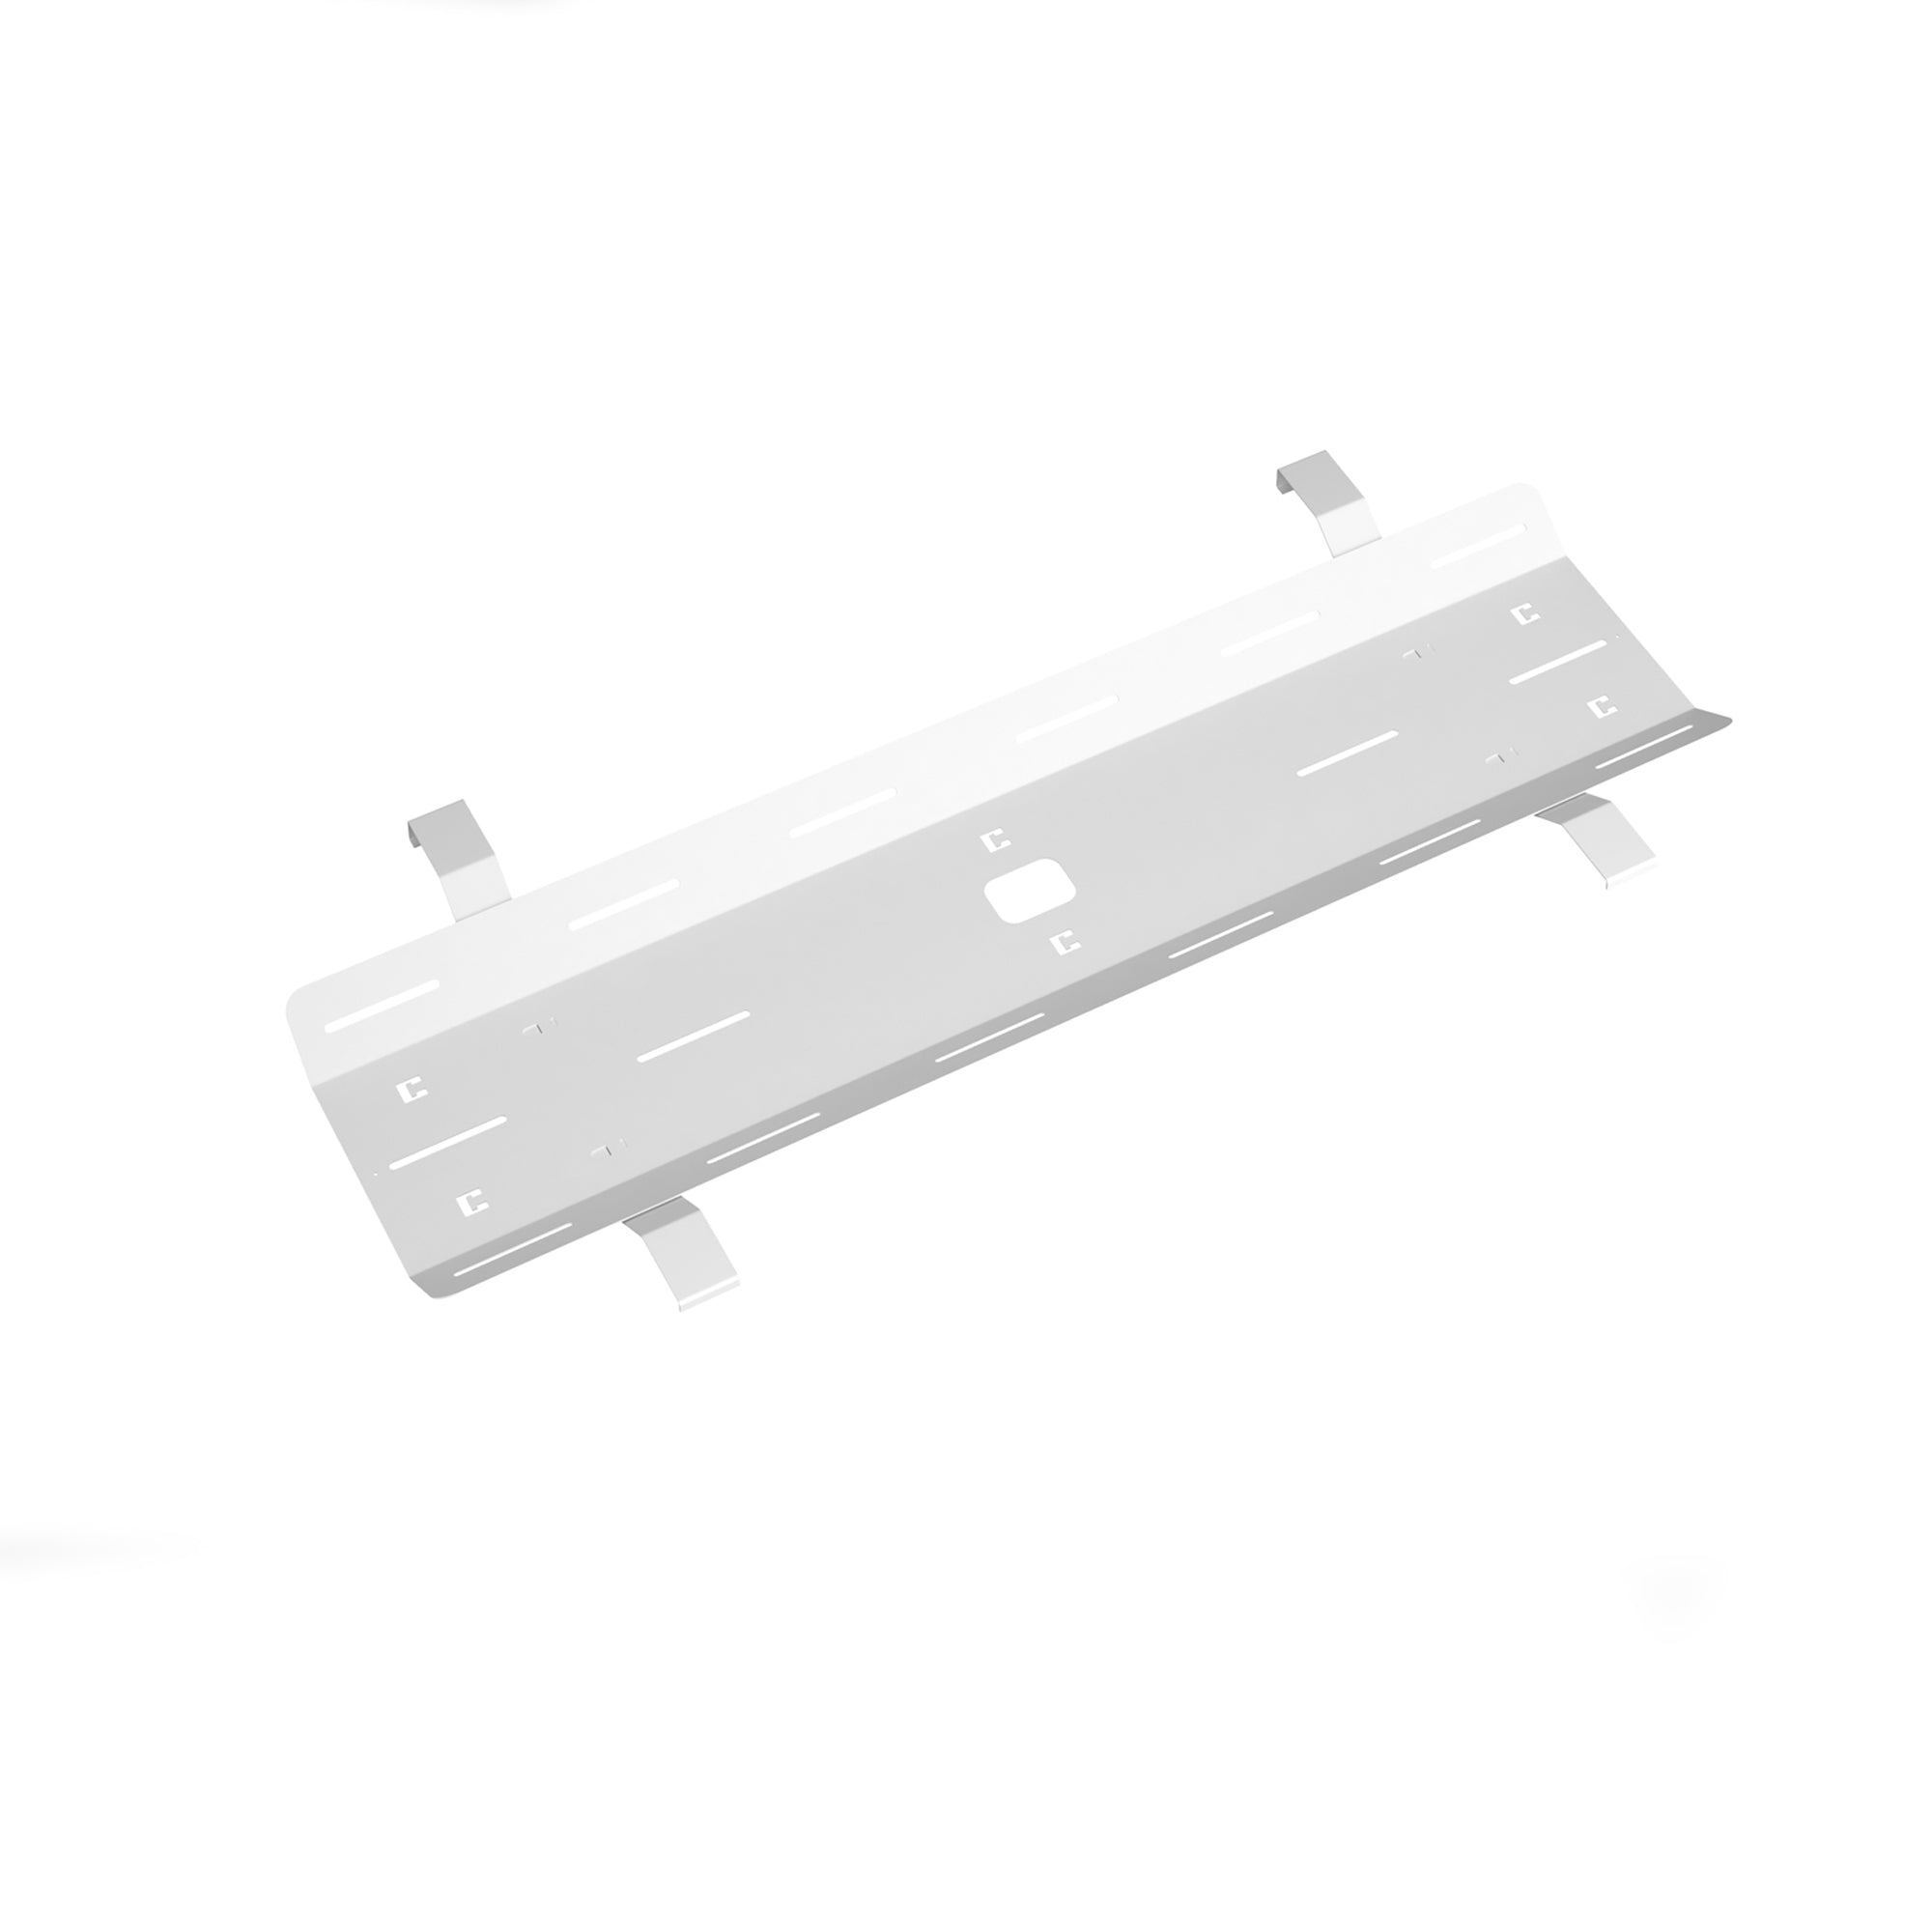 Double drop down cable tray & bracket for Adapt and Fuze desks - Office Products Online